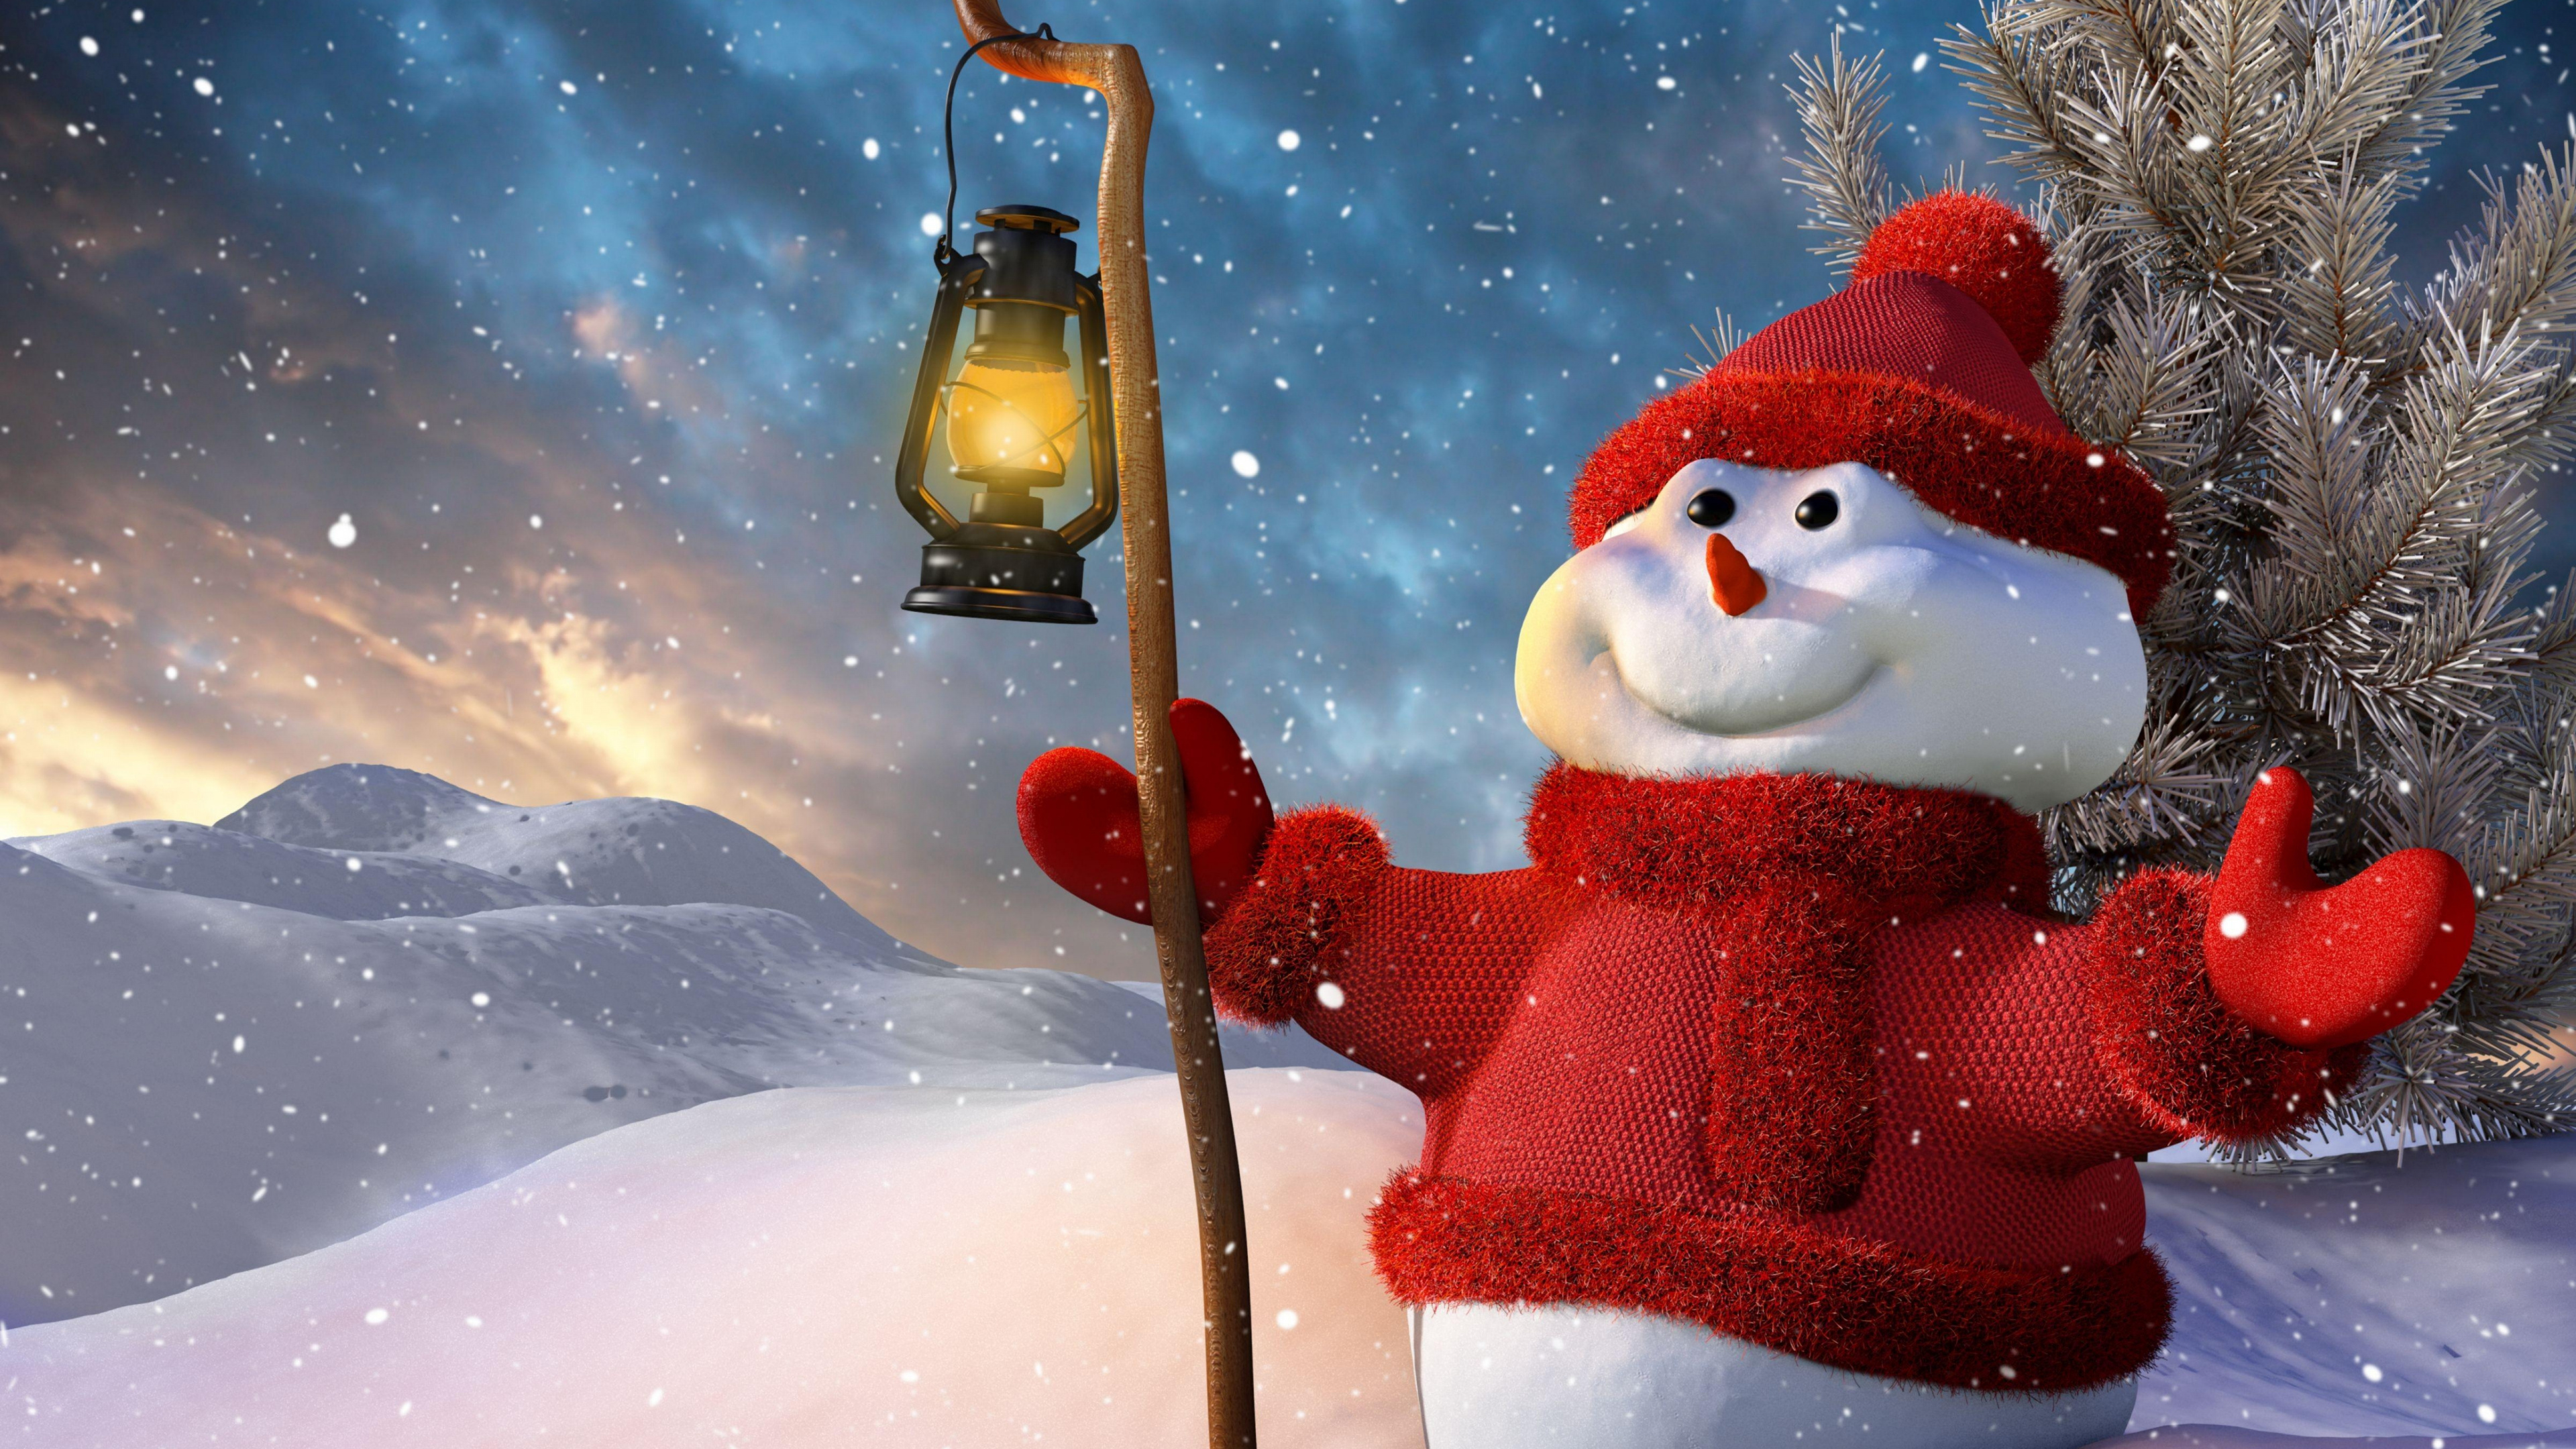 Snowman, Christmas, Space, Freezing, Christmas Tree. Wallpaper in 3840x2160 Resolution